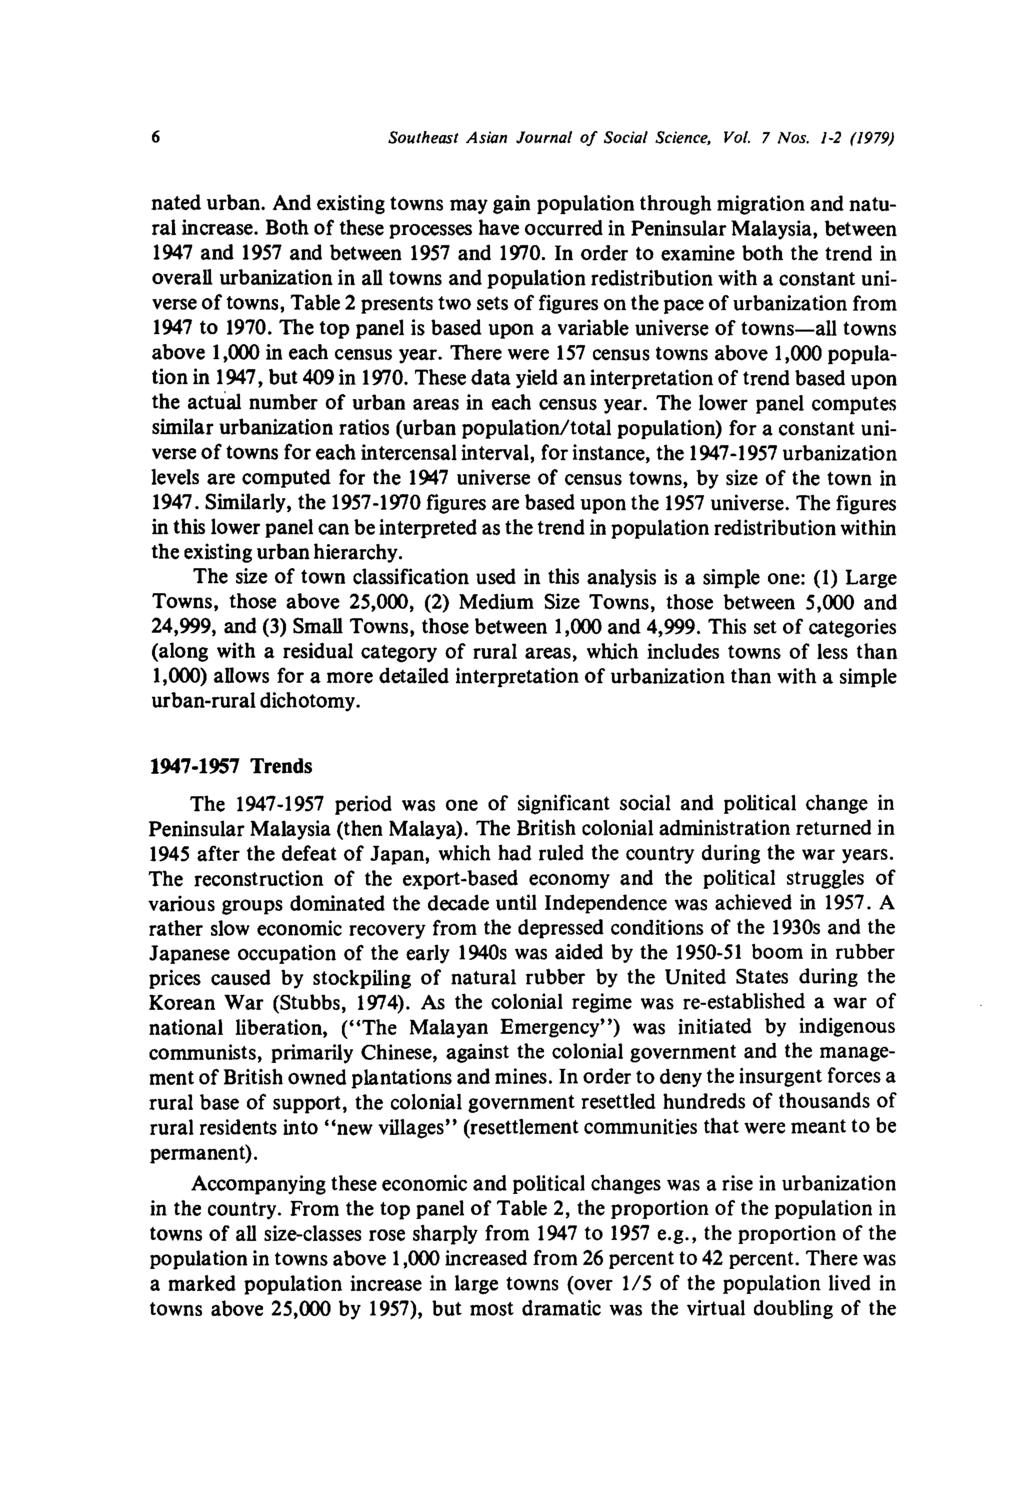 6 Southeast Asian Journal of Social Science, Vol. 7 Nos. 1-2 (1979) nated urban. And existing towns may gain population through migration and natural increase.